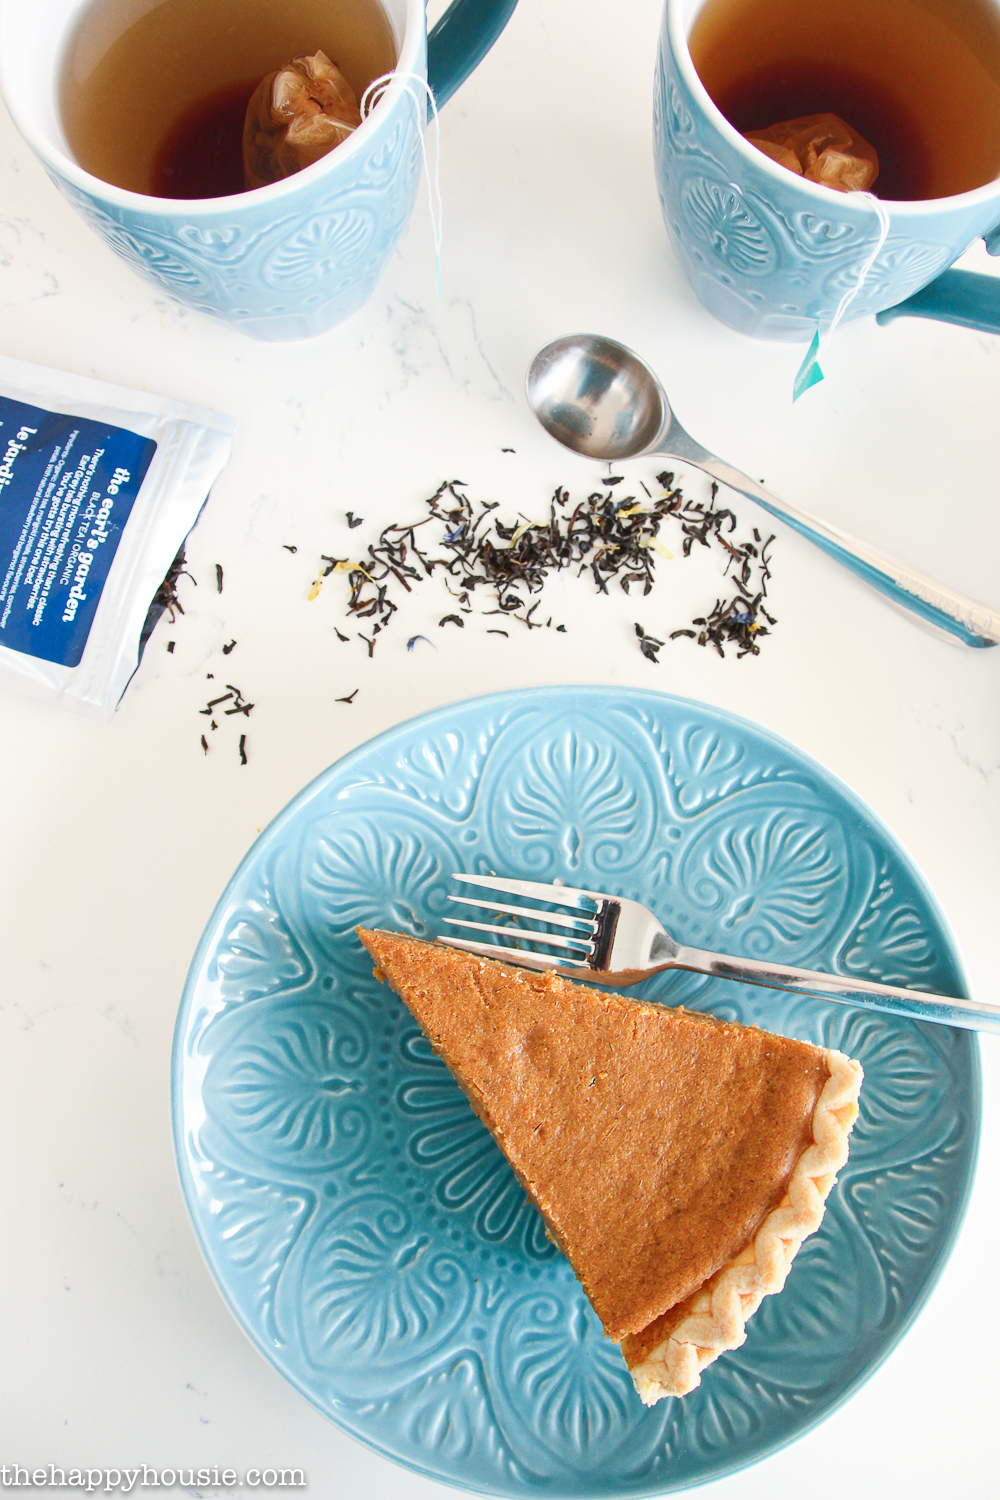 A slice of pumpkin pie on a blue plate with a cup of tea beside it.